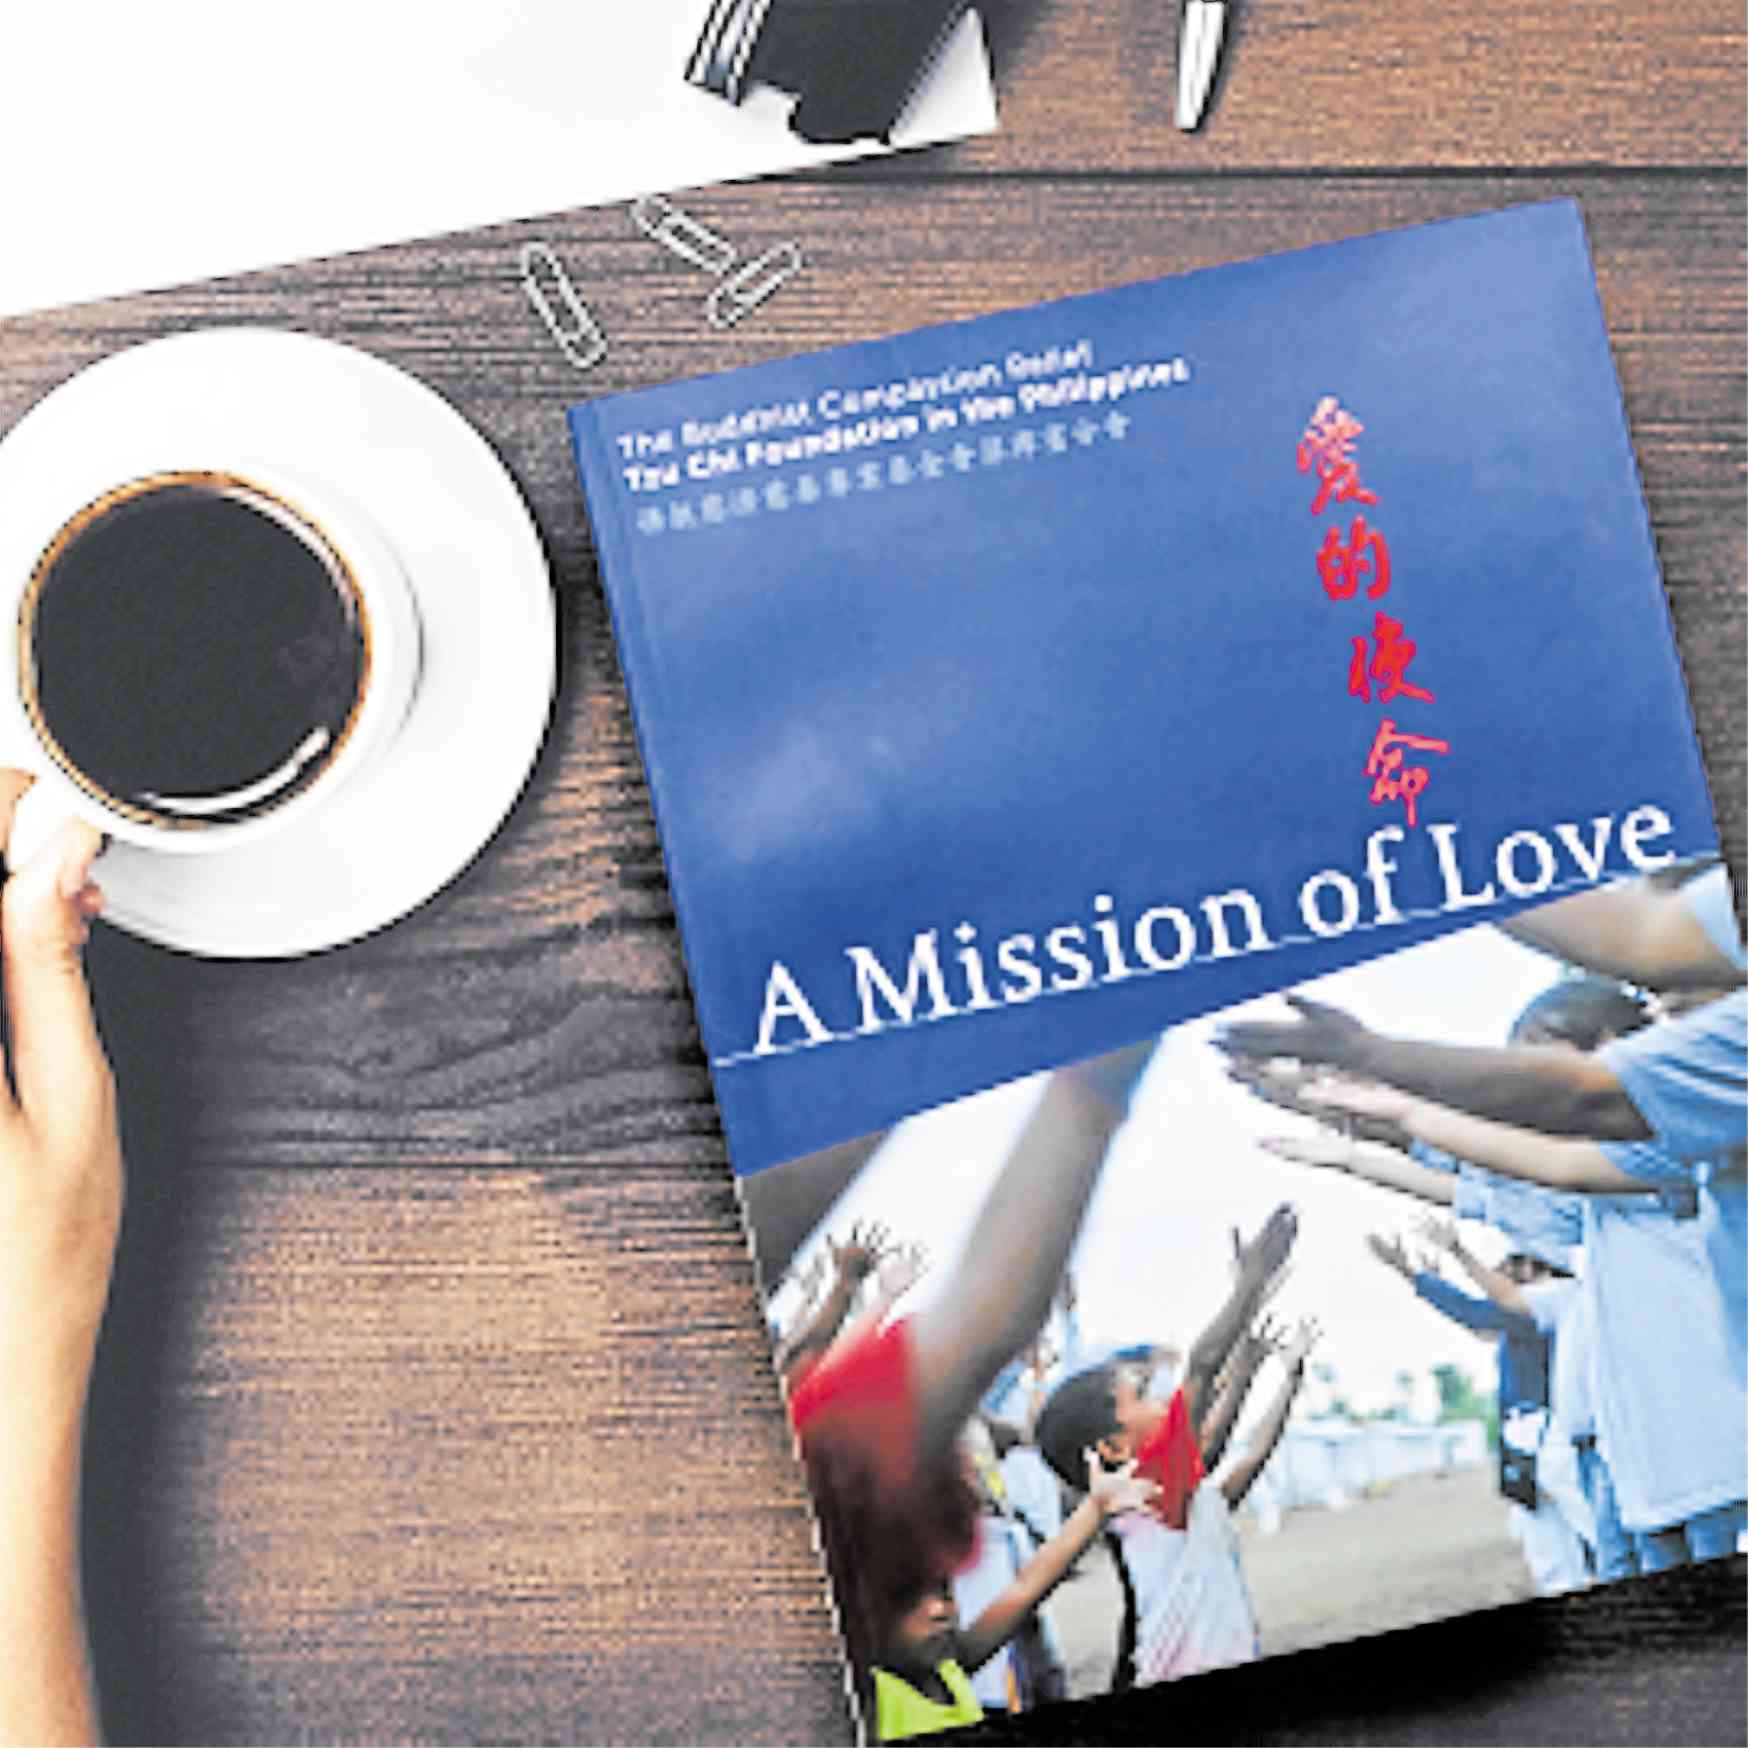 Tzu Chi’s “A Mission of Love” book